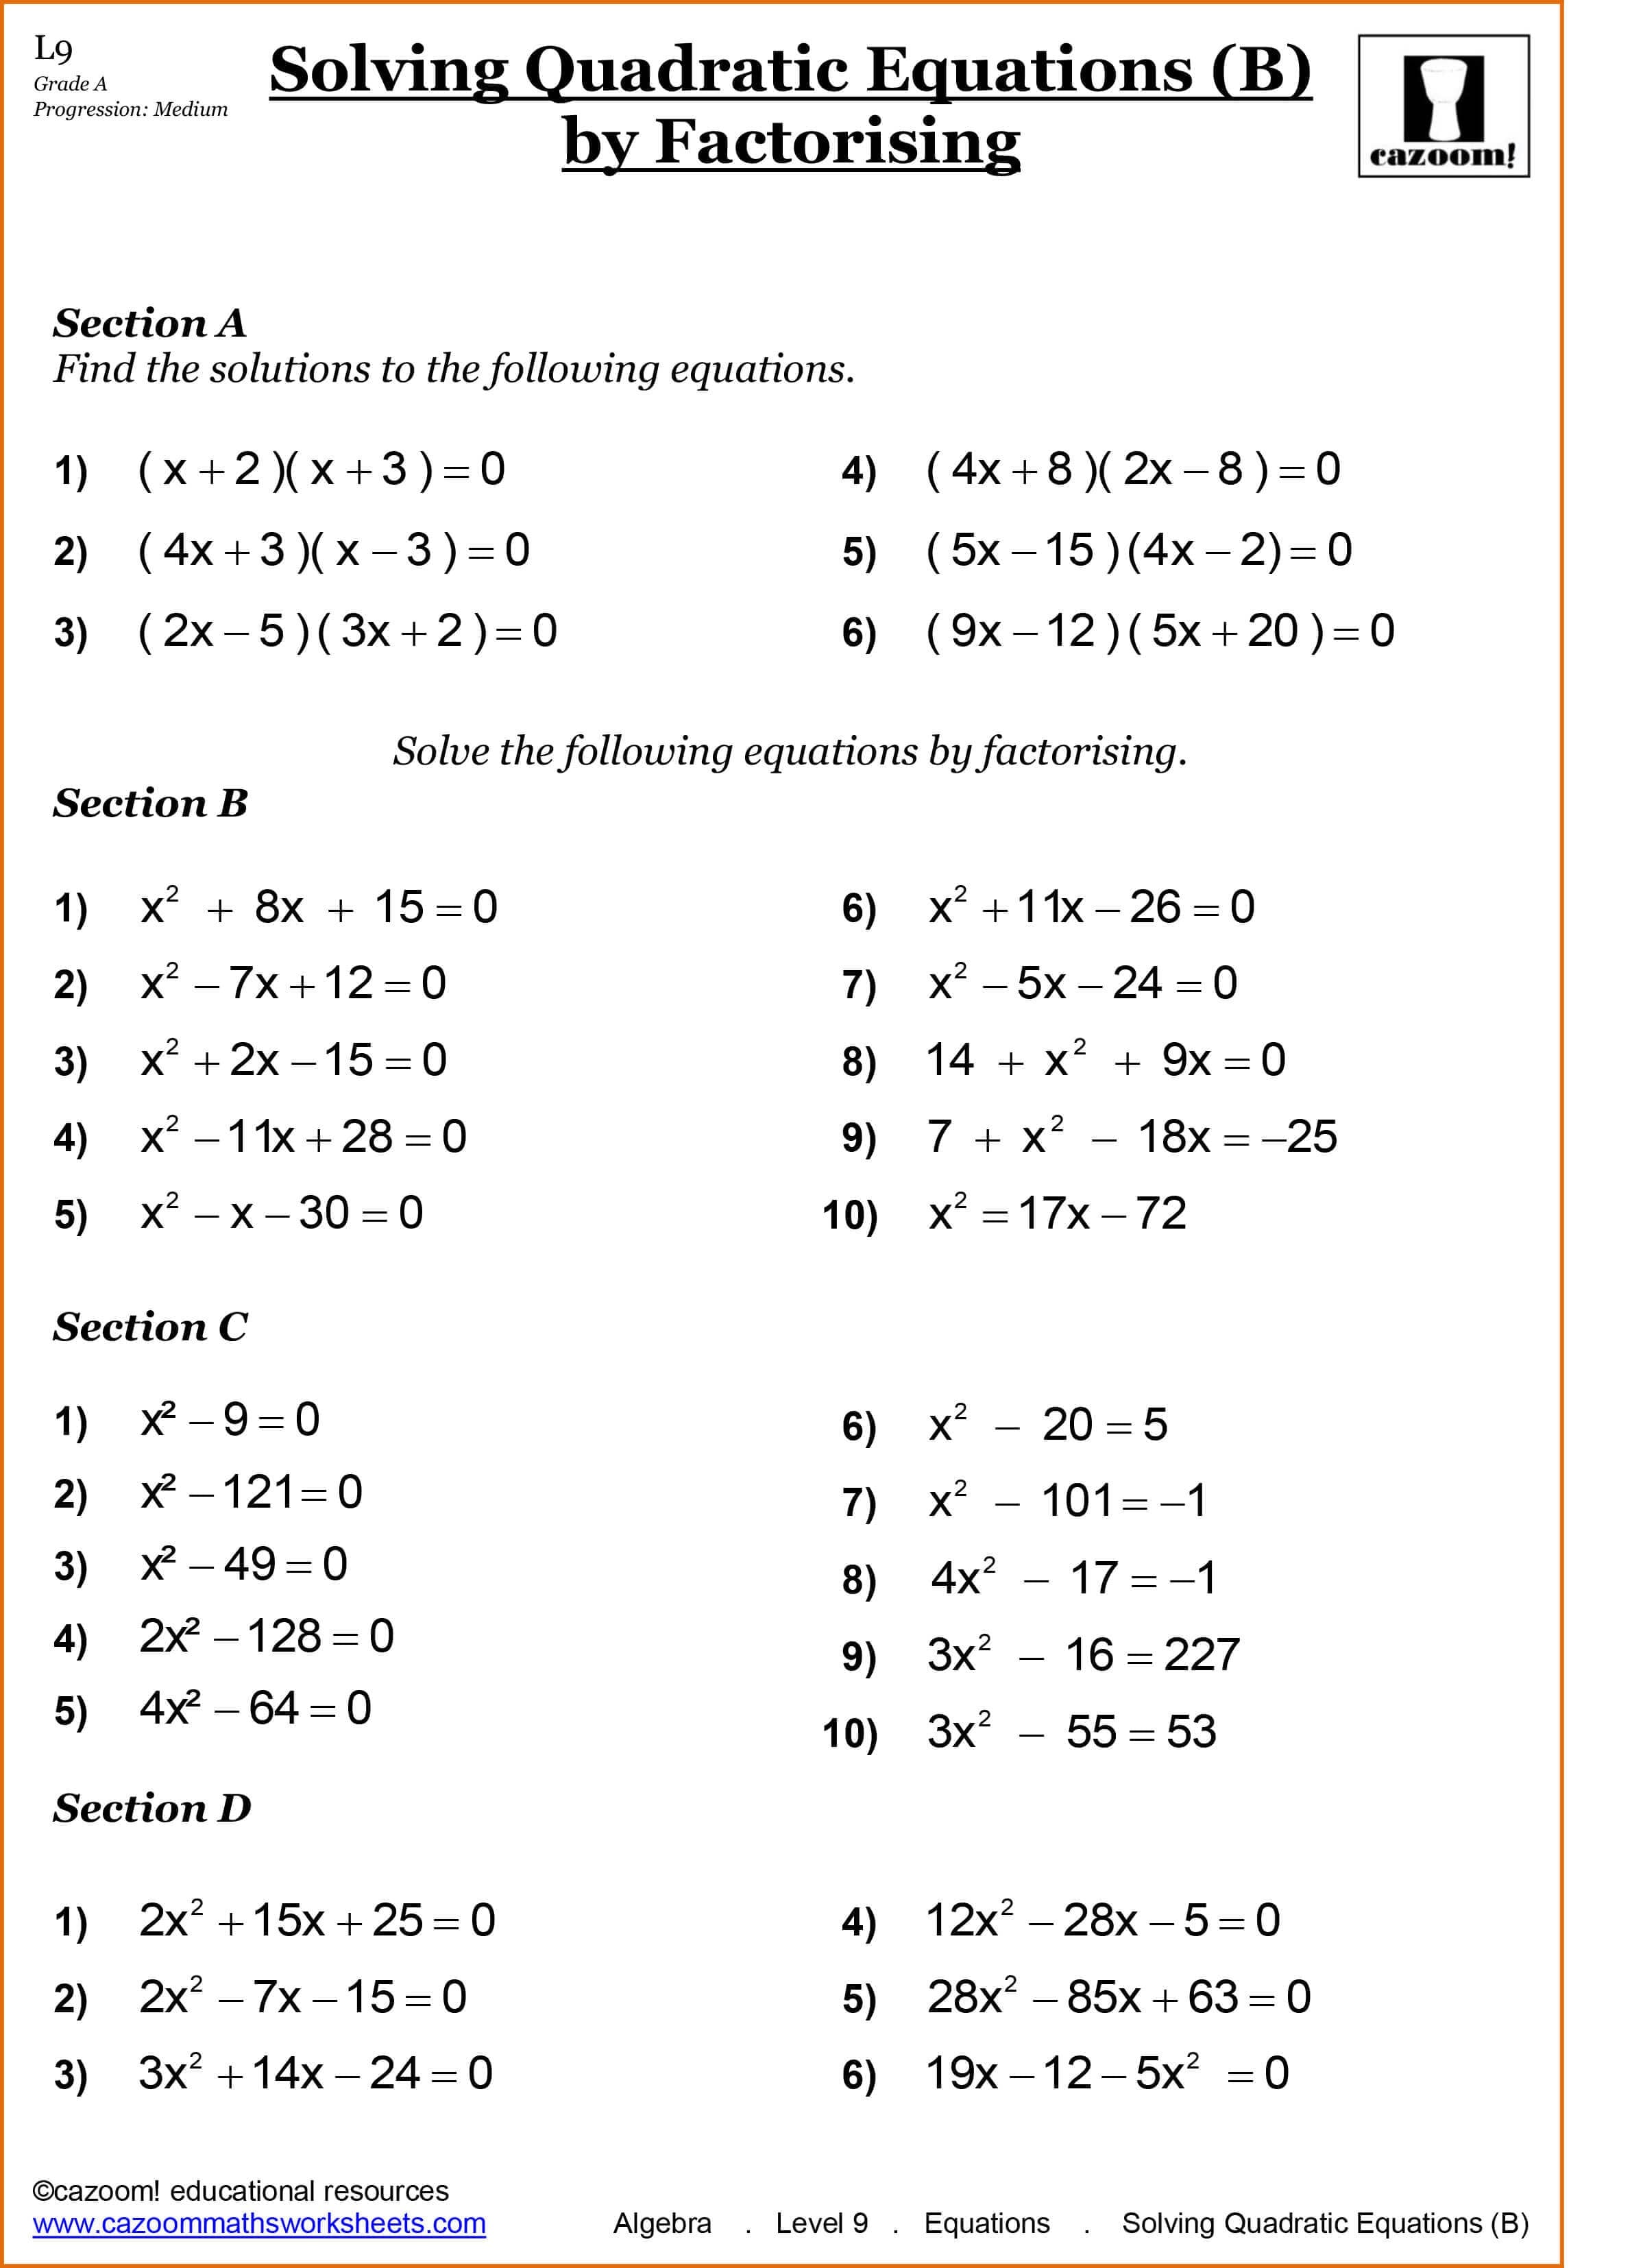 Maths For 10 Year Olds Worksheets — db-excel.com